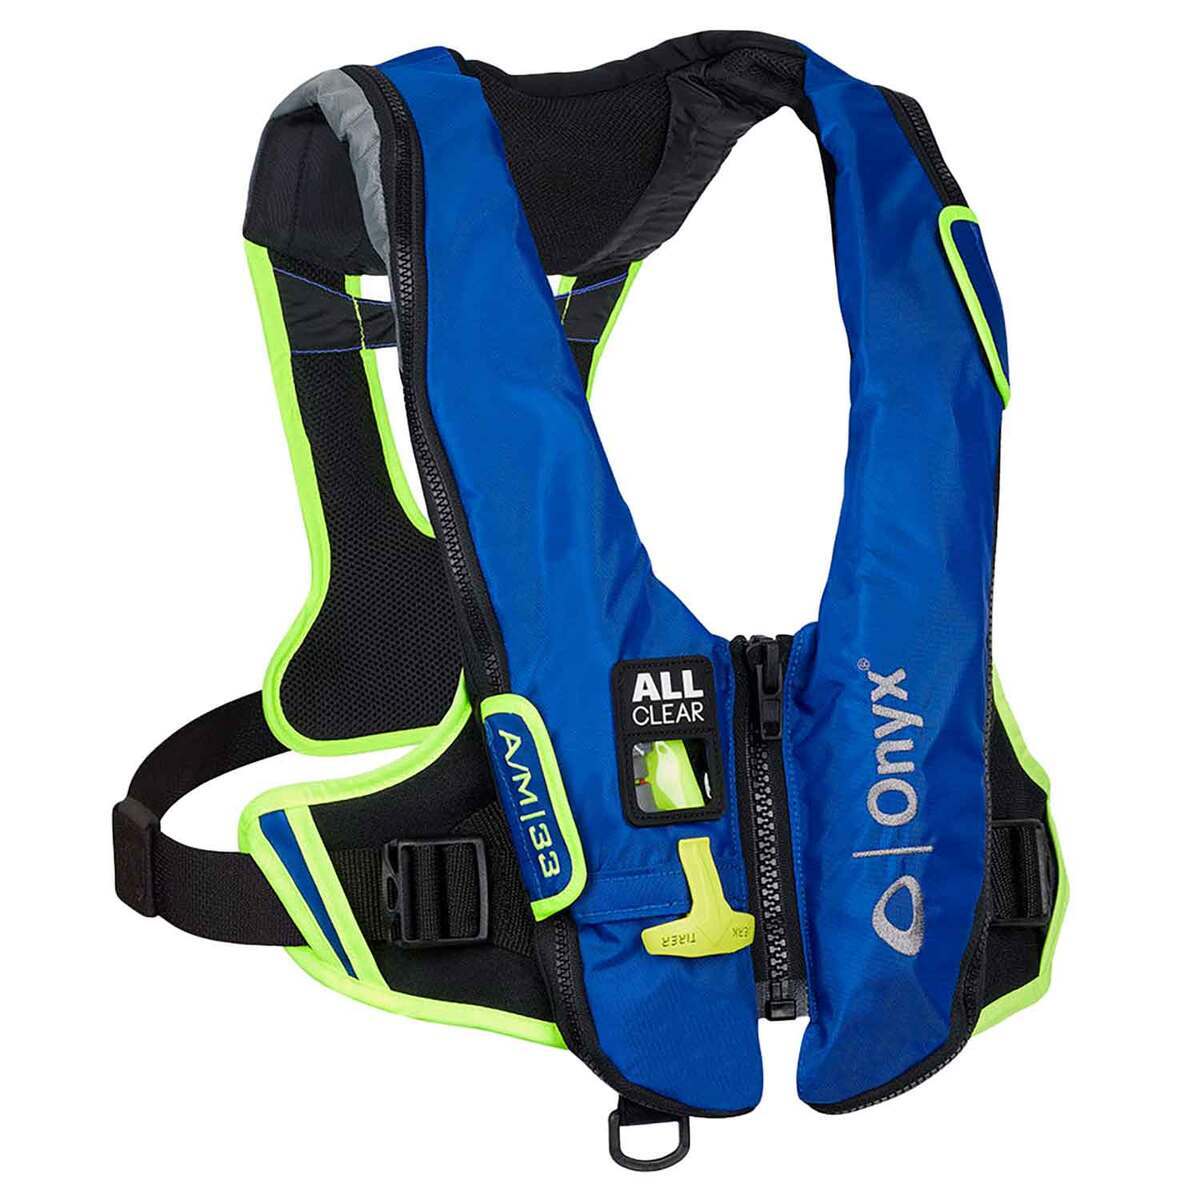 Self-inflating life jacket - M-16 - ONYX OUTDOOR - unisex / for fishing